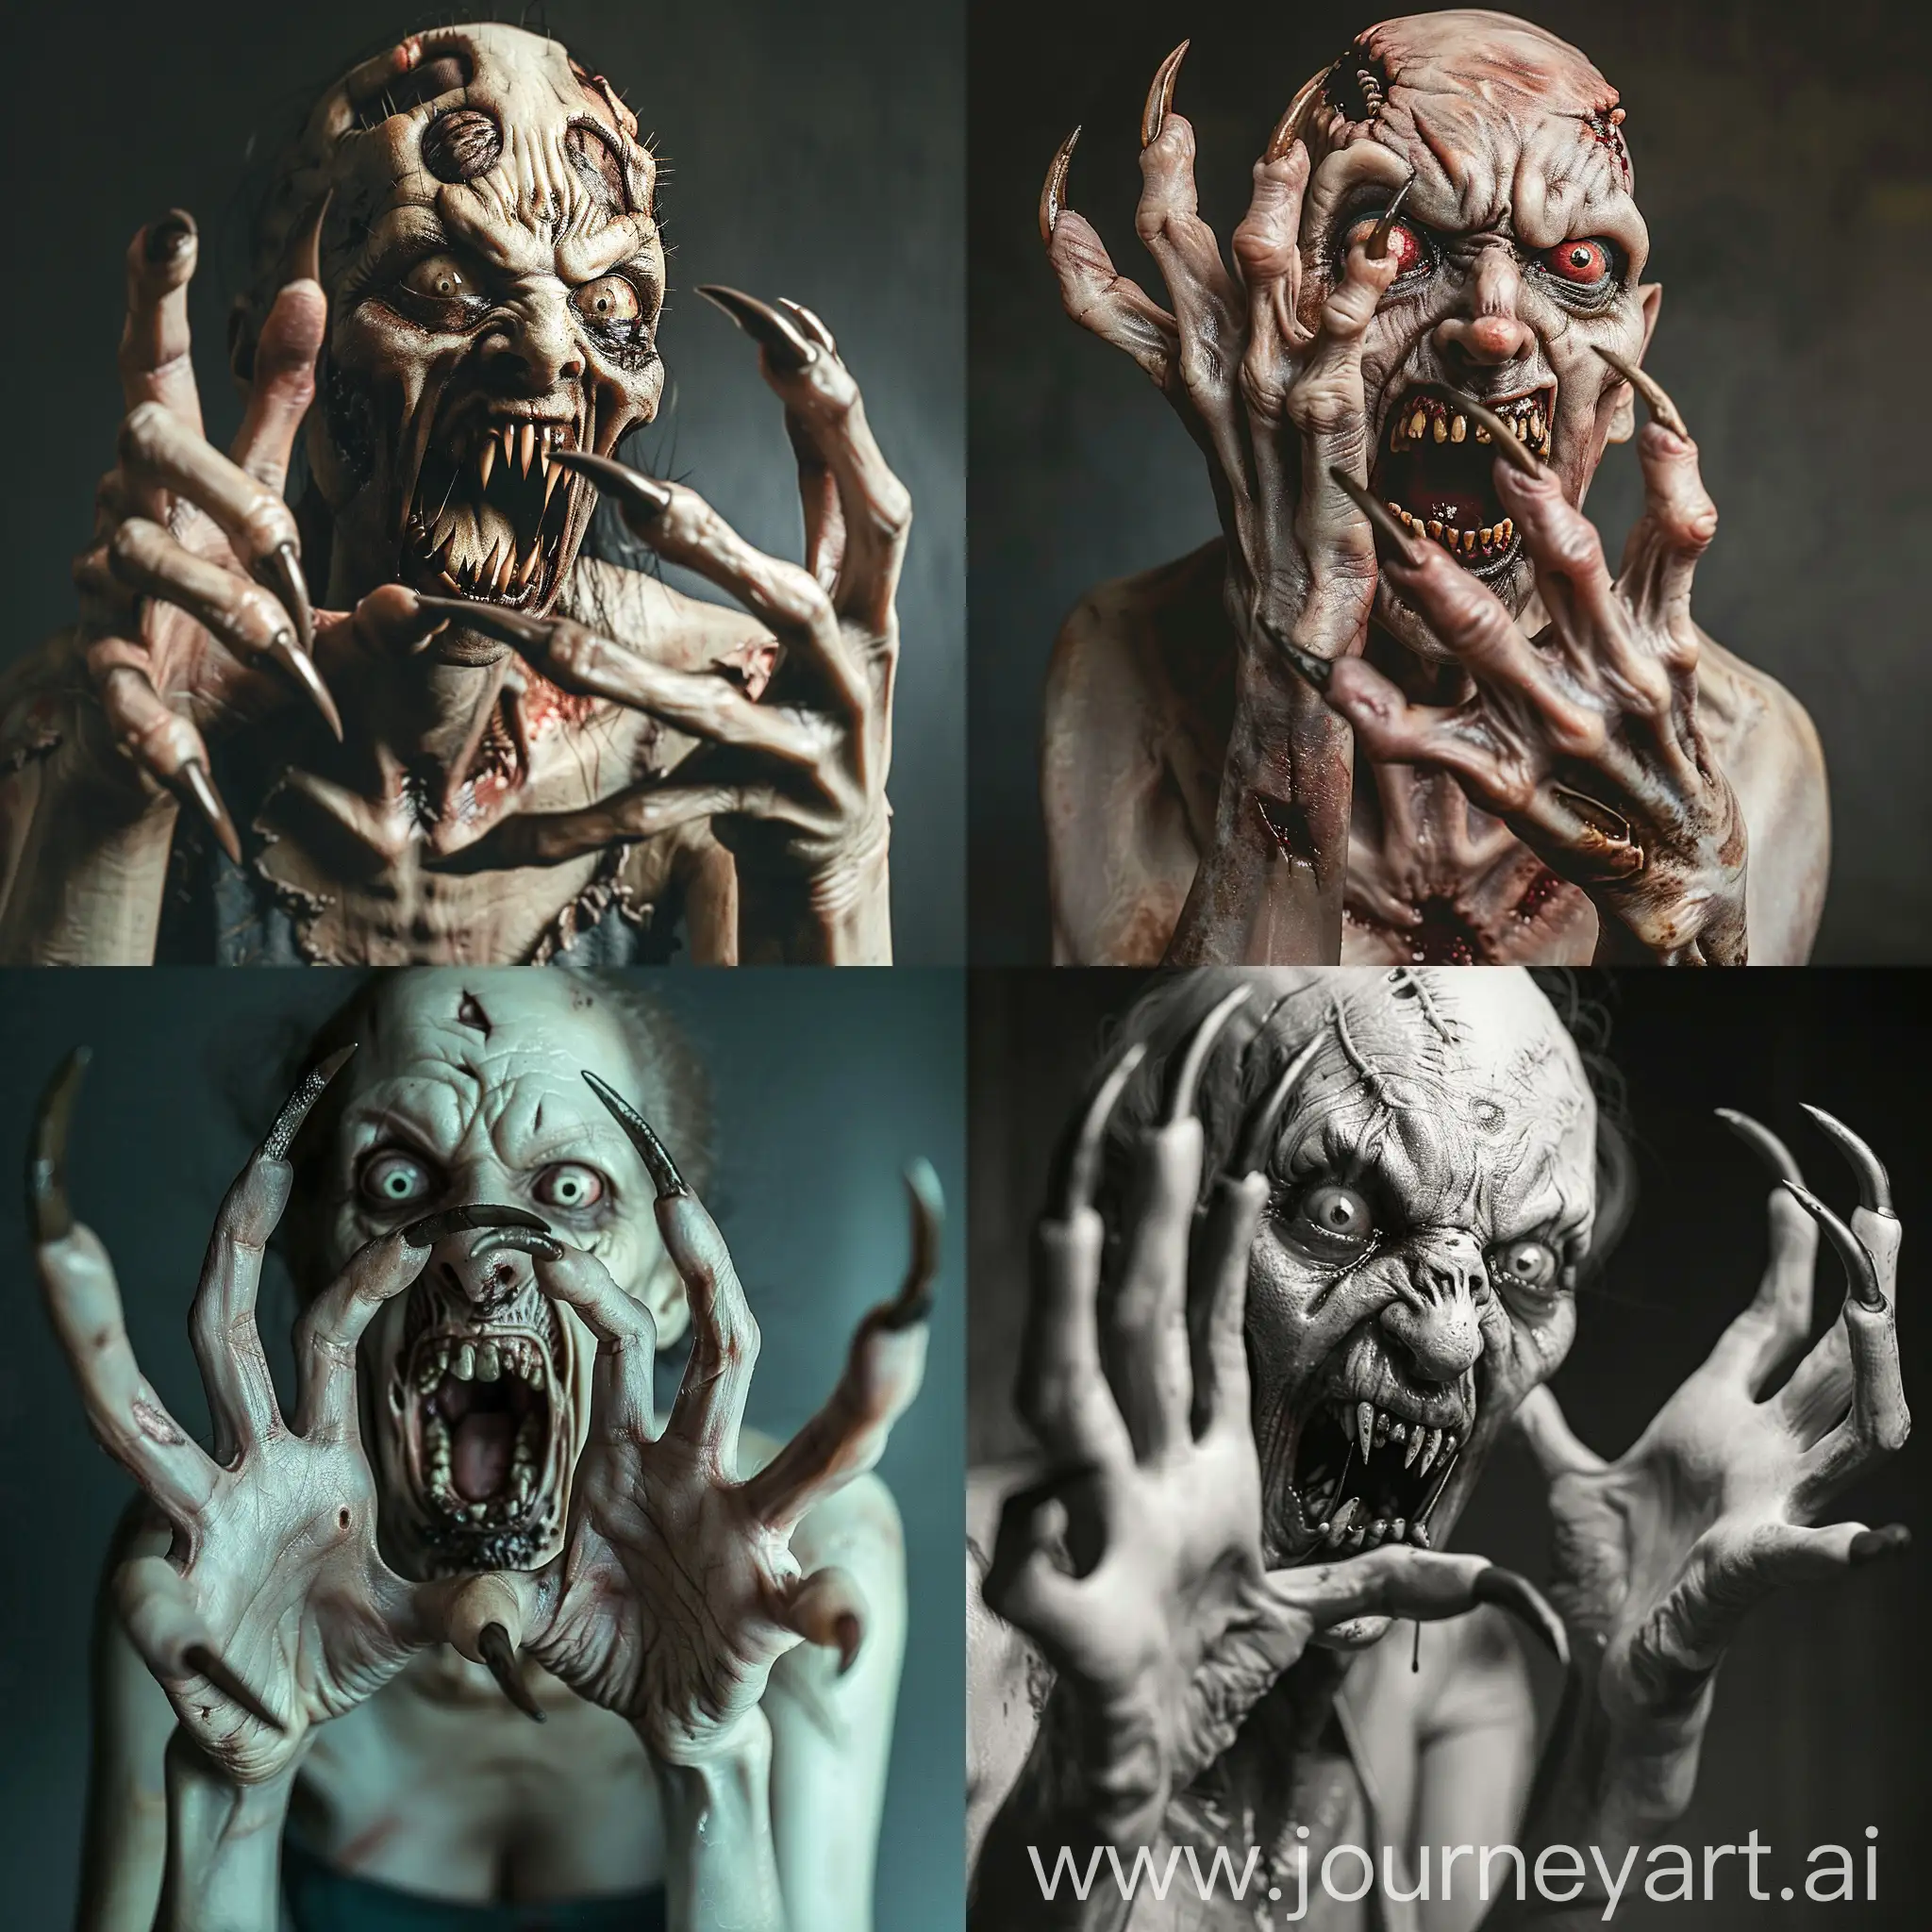 "Describe a zombie woman in a dynamic pose for a horror scene. She has long, curved pointed nails resembling claws on her five fingers. Her skin is pale and appears rotten. Her eyes are vacant and her mouth is wide open, revealing a row of sharp, pointed teeth that are similar to fangs. Please provide a detailed and vivid description."